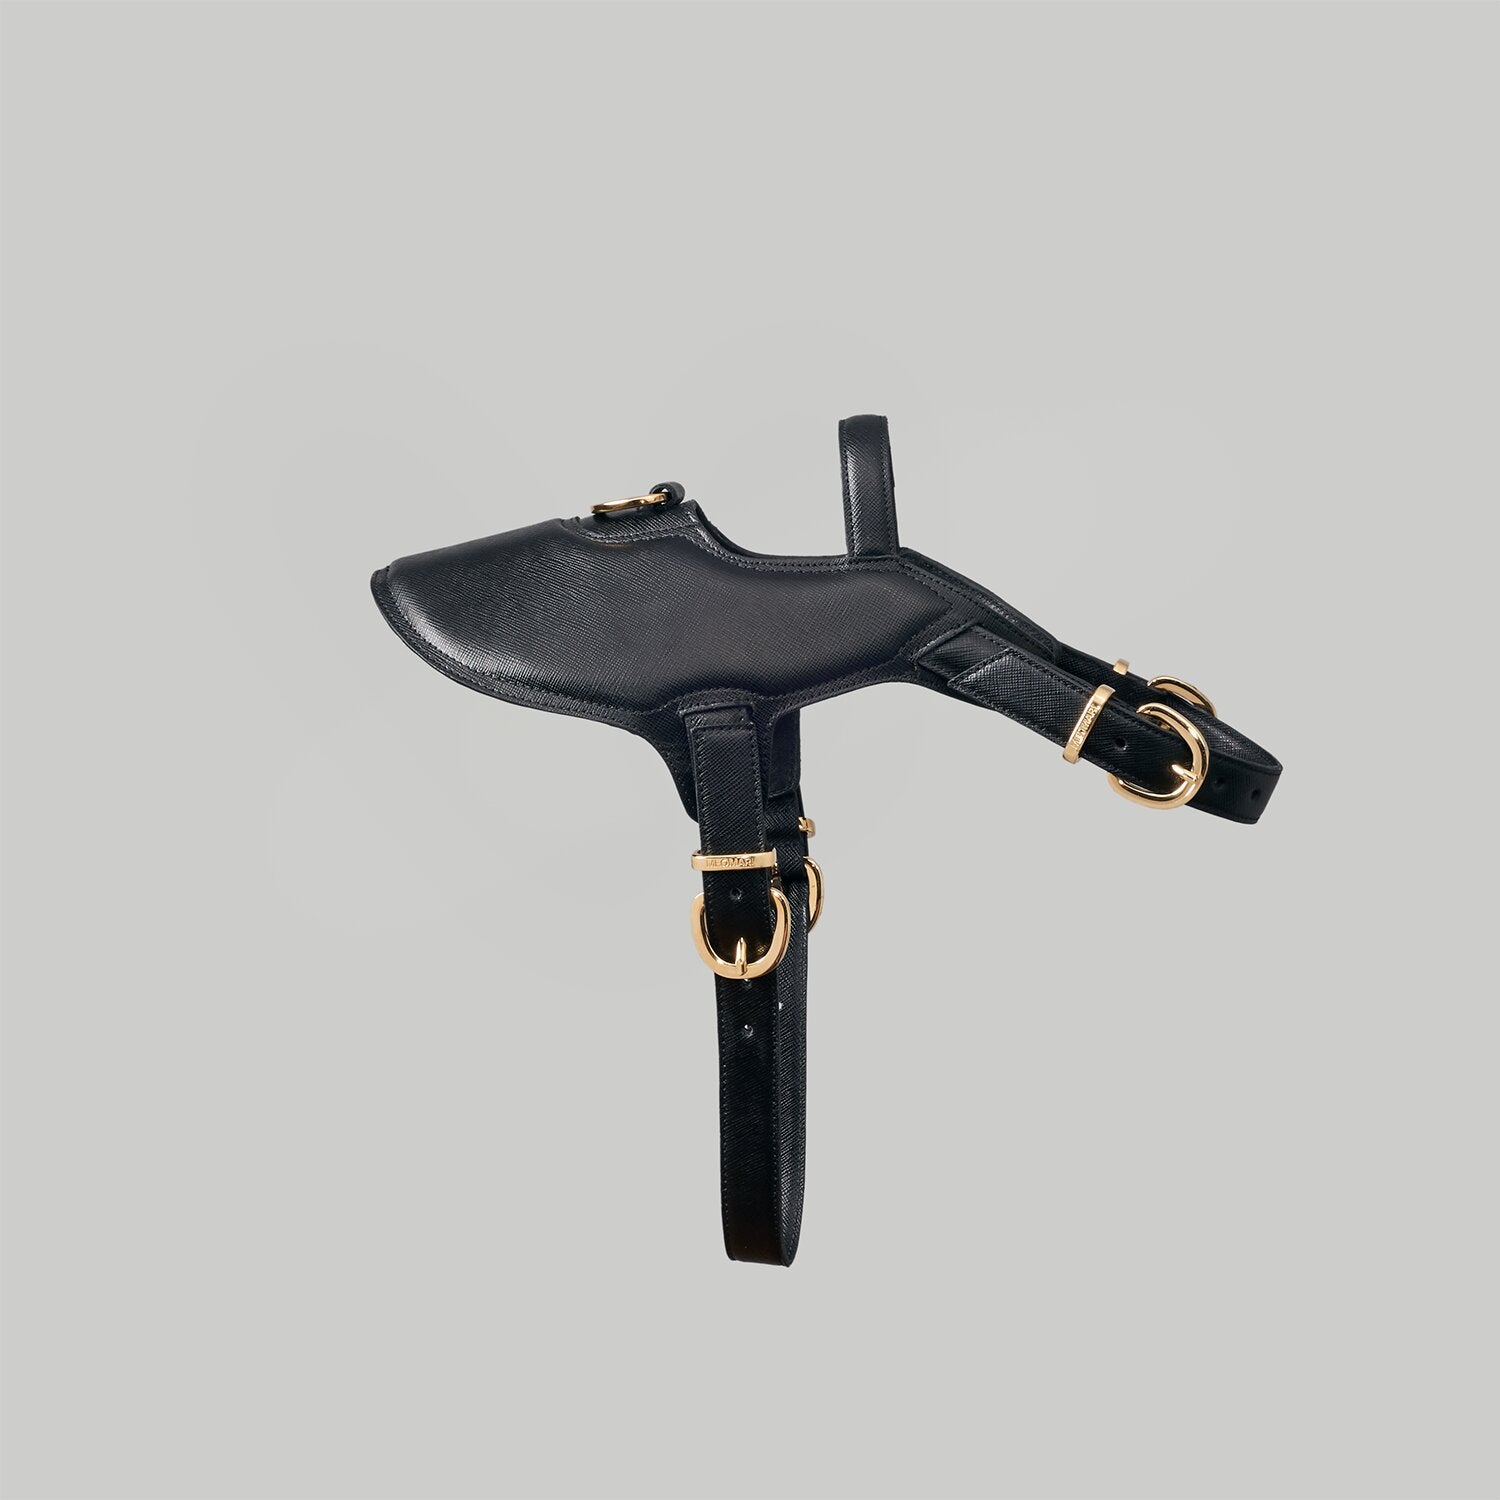 Dog harness in black Saffiano leather with Gold